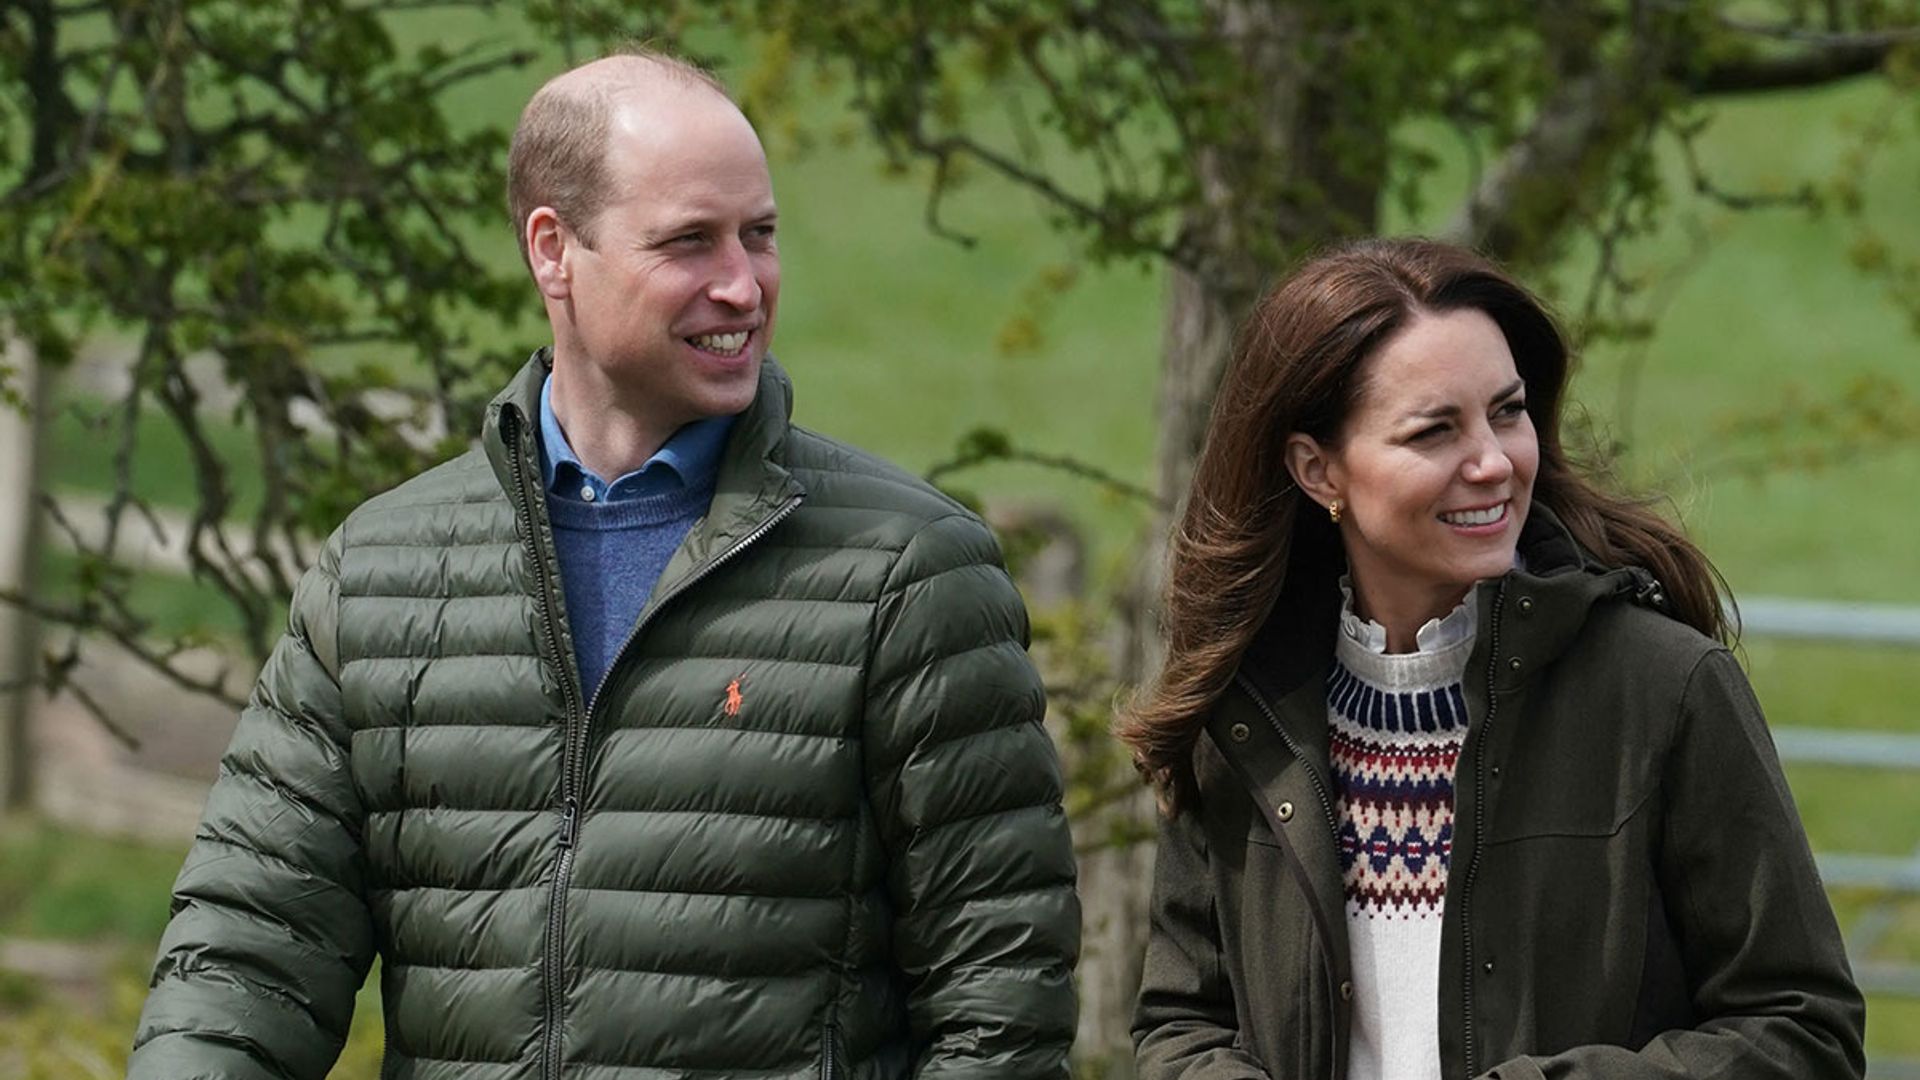 Prince William and Kate Middleton's touching meeting revealed and it links to a royal tour